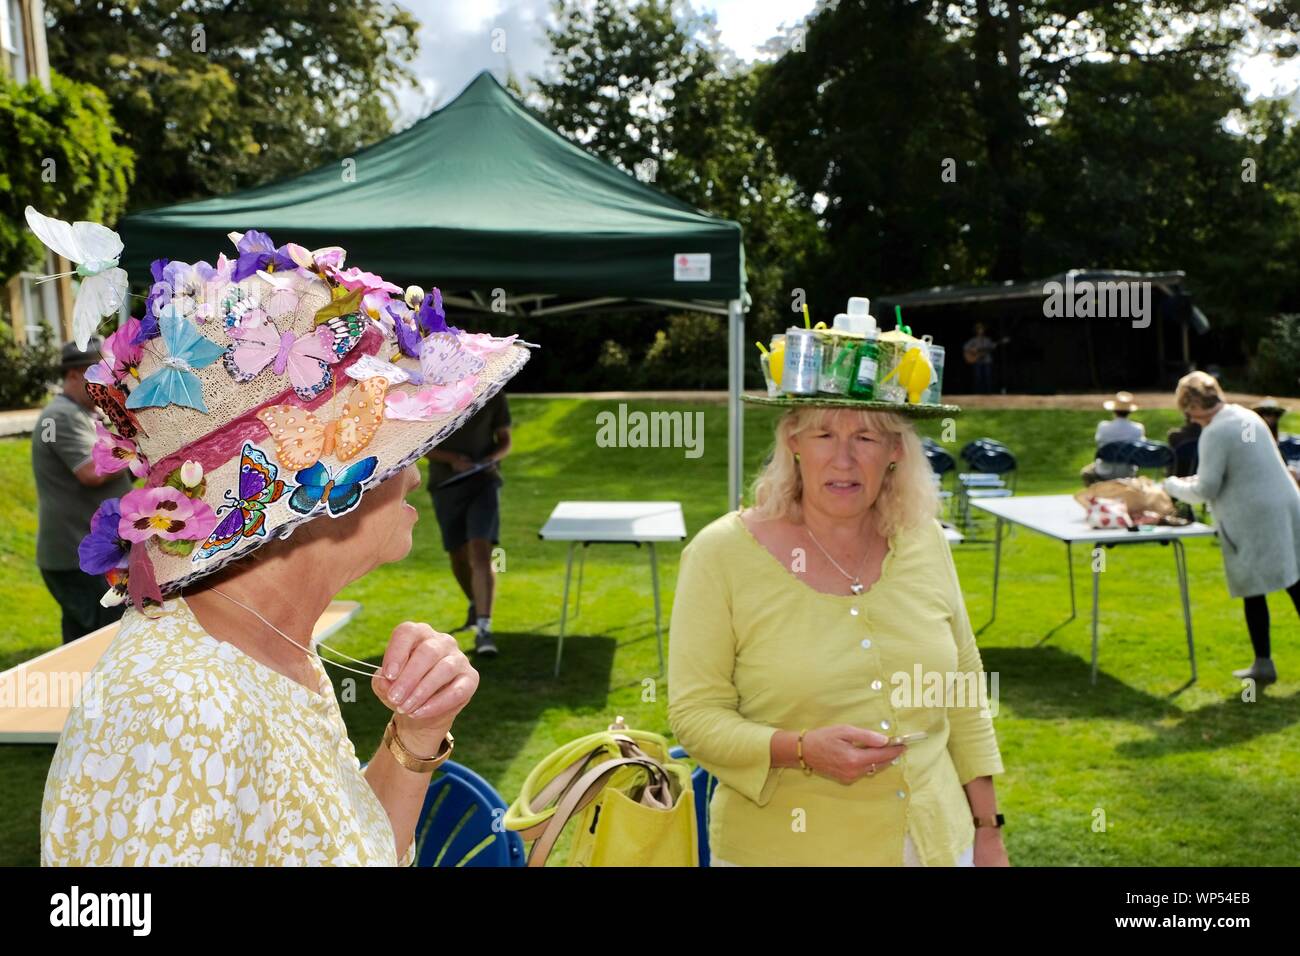 Bridport, Dorset, UK. 7 September 2019. Hat wearers of all types gather and promenade in Bridport. The annual Bridport Hat Festival encourages residents and visitors to take part in hat related activities and and competitions including best hats, best hatted dog, and best hatted couple and most elegant ensemble. Credit: Tom Corban/Alamy Live News Stock Photo